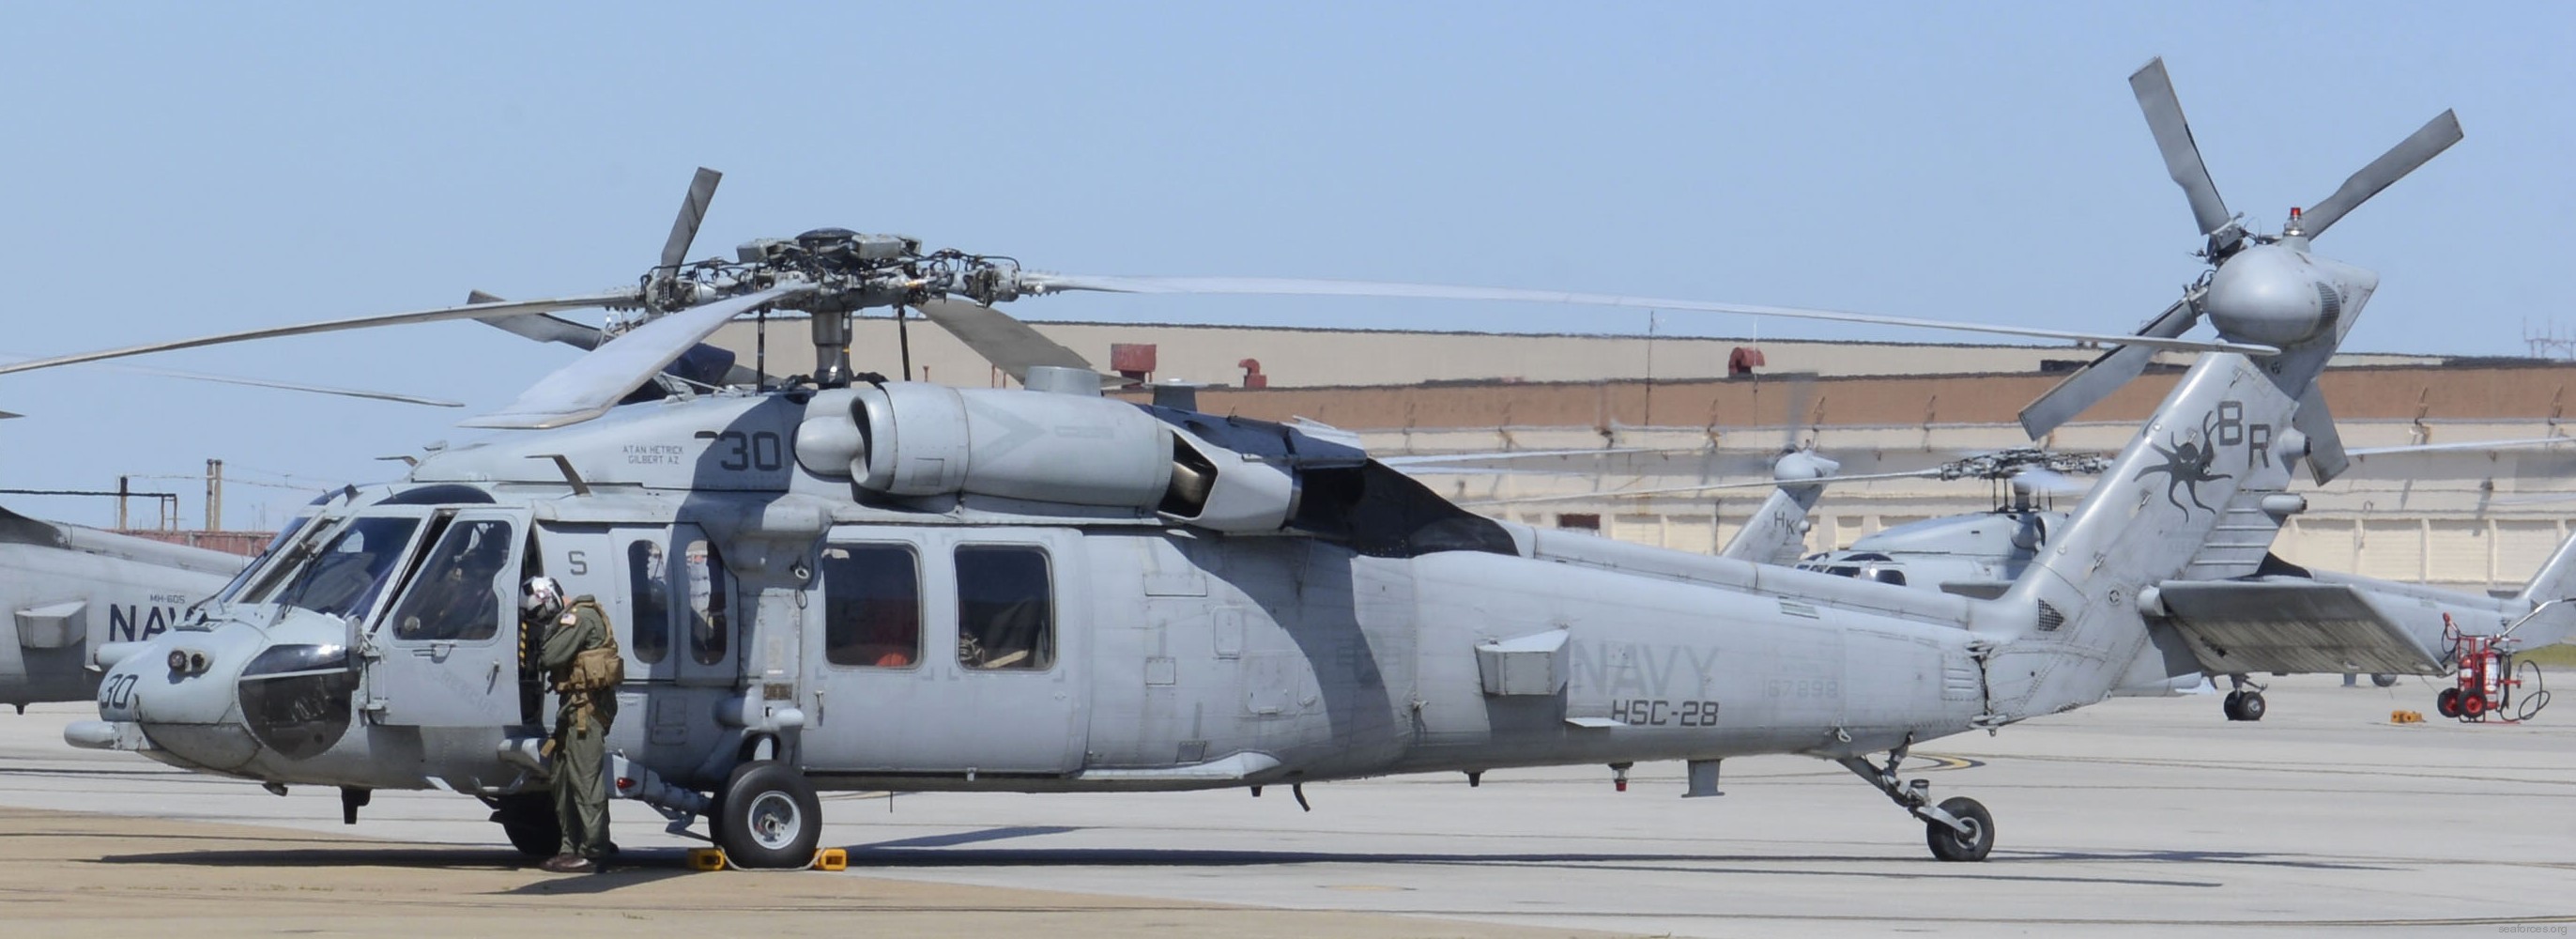 hsc-28 dragon whales helicopter sea combat squadron mh-60s seahawk us navy 54a norfolk virginia